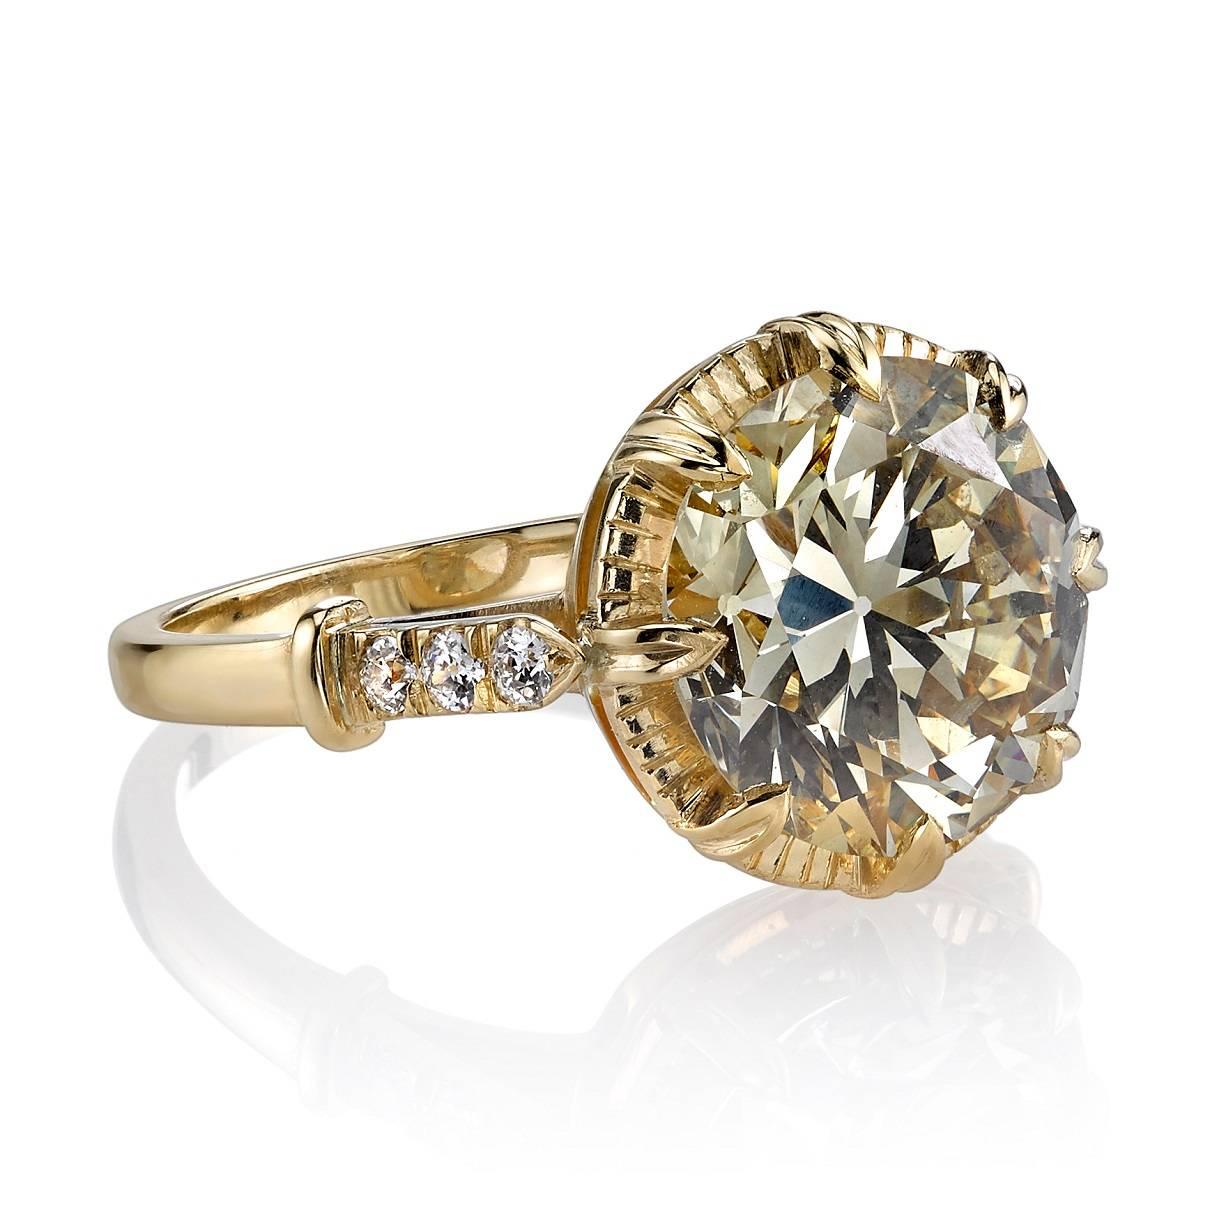 4.44ct Brown-Yellow/VS1 old European cut diamond GIA certified and set in a handcrafted 18k yellow gold mounting.  A sweet solitaire design featuring a unique illusion and low profile.